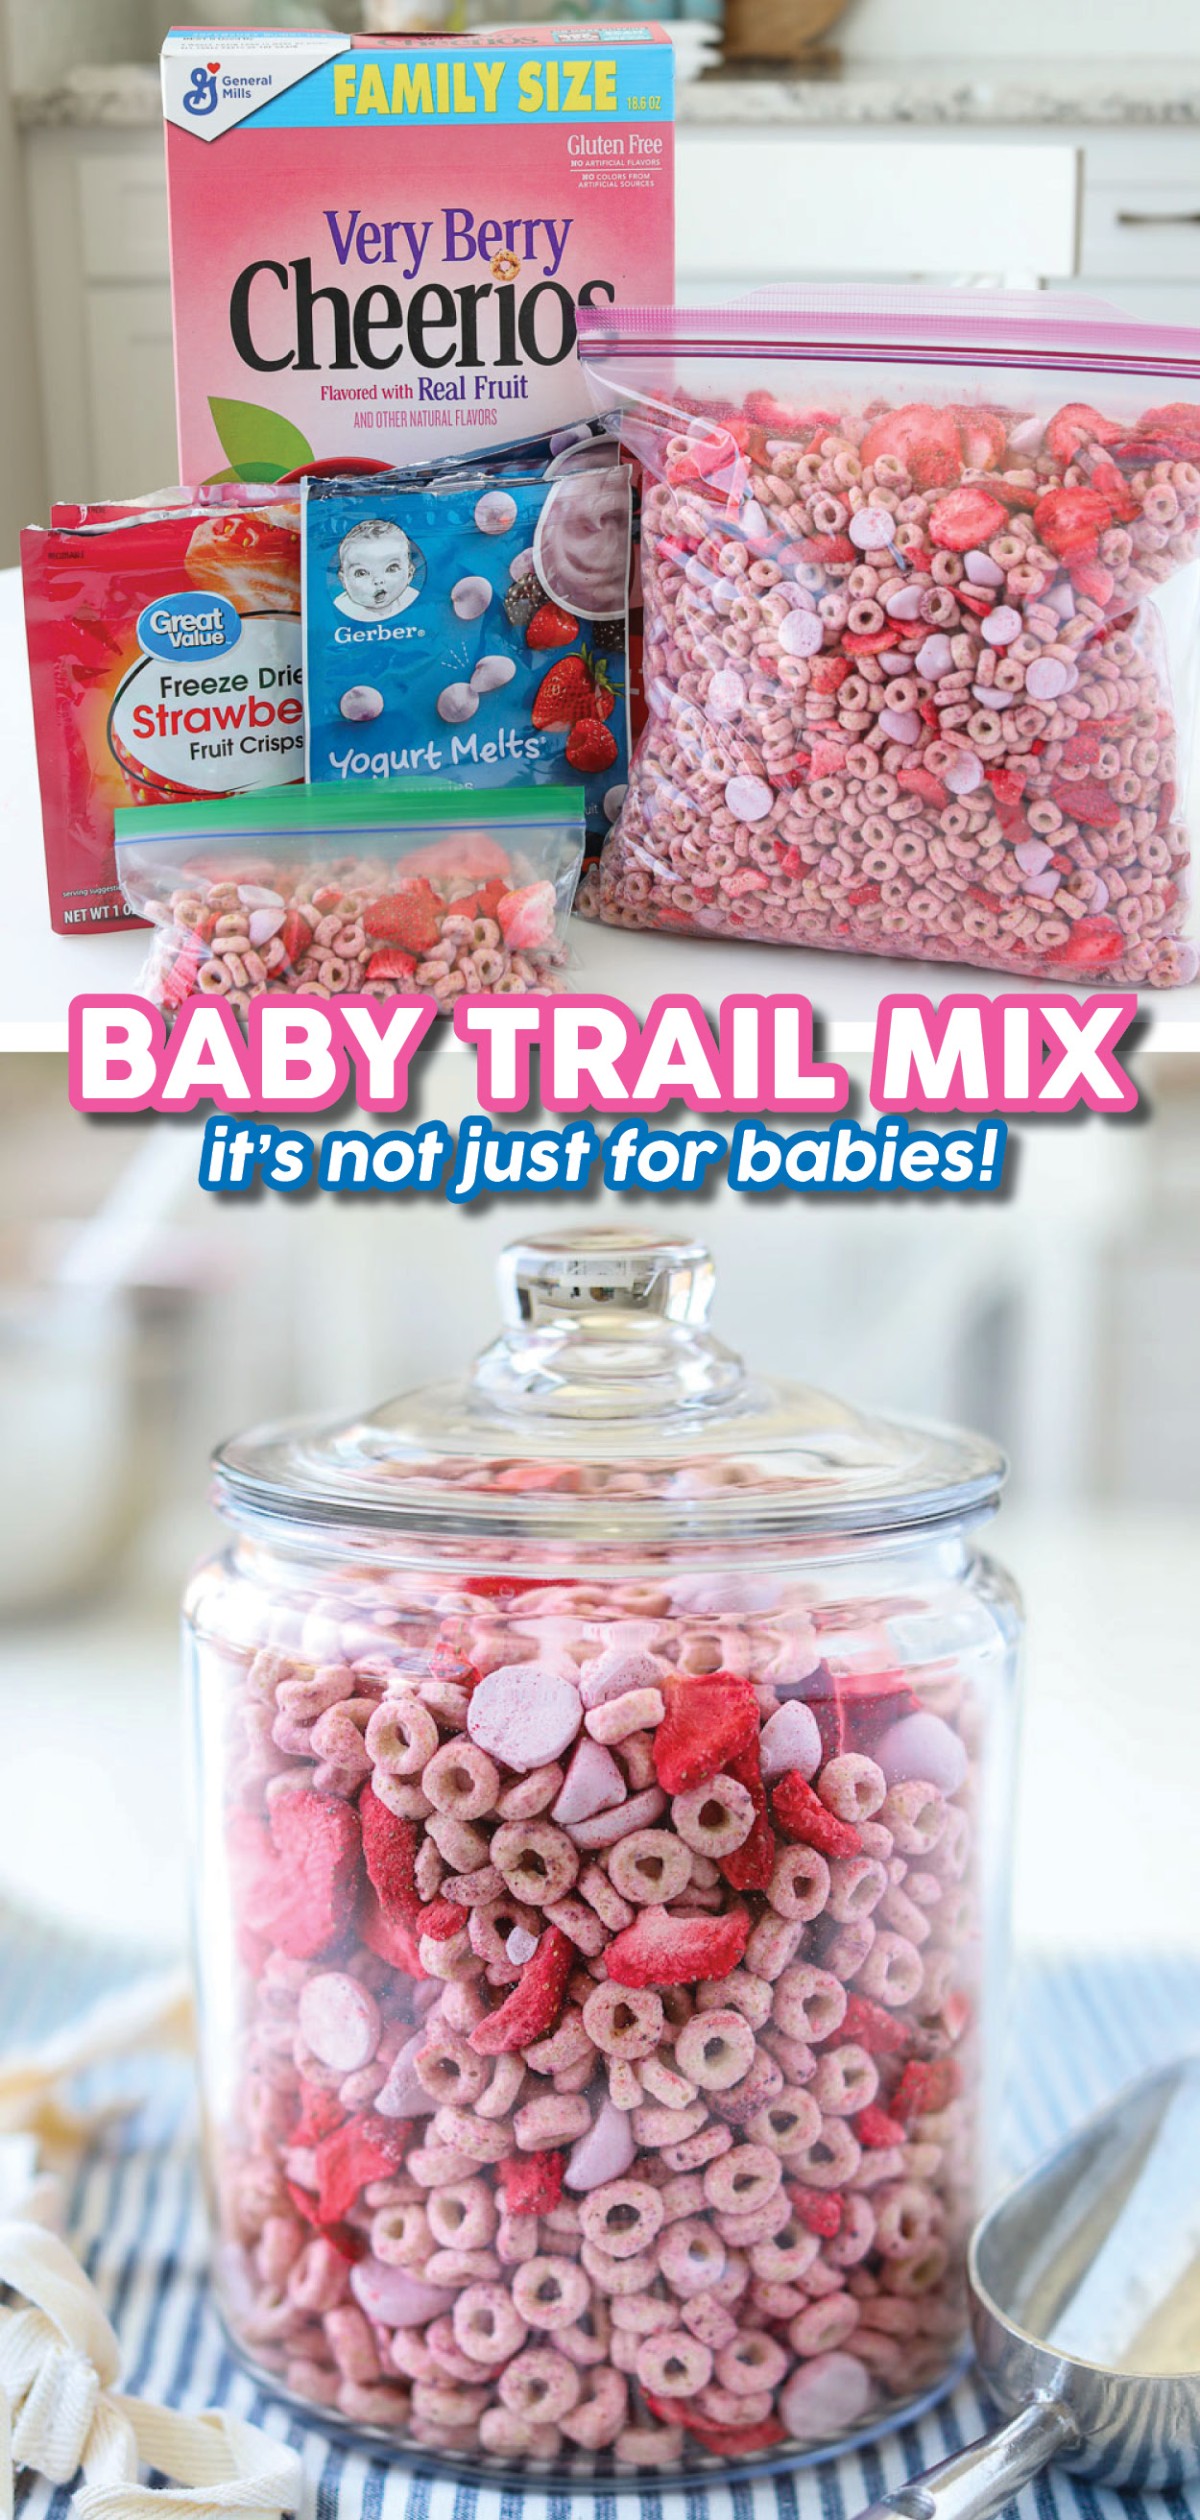 Baby Trail Mix isn't just for babies! For babies, as well as toddlers, big kids…. pretty much anyone because it’s DELICIOUS!